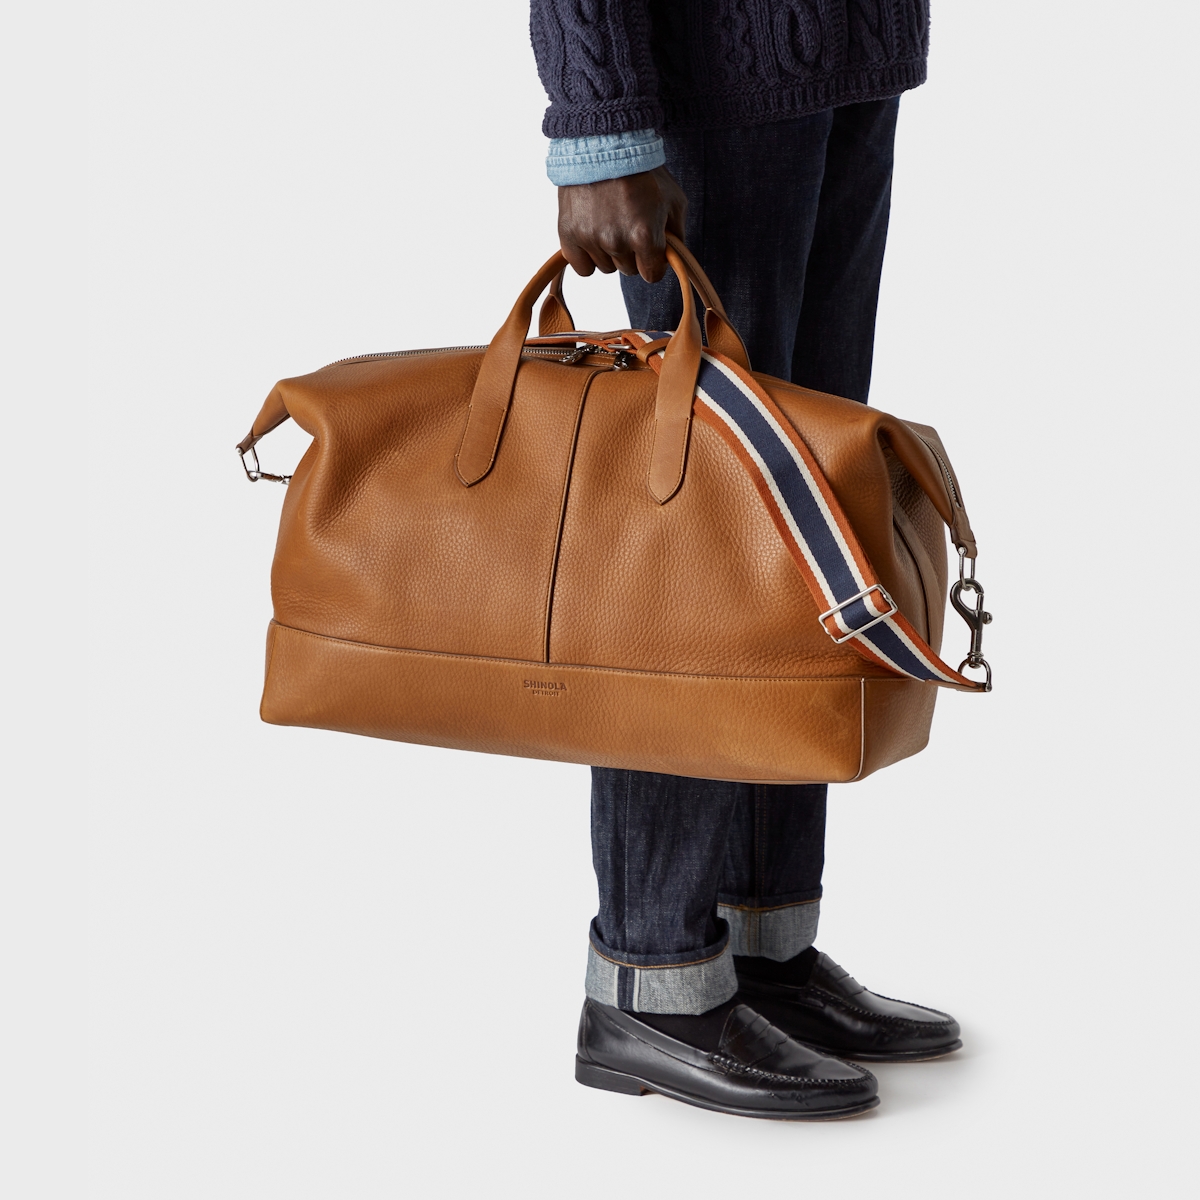 Shinola Canfield Carryall review. 